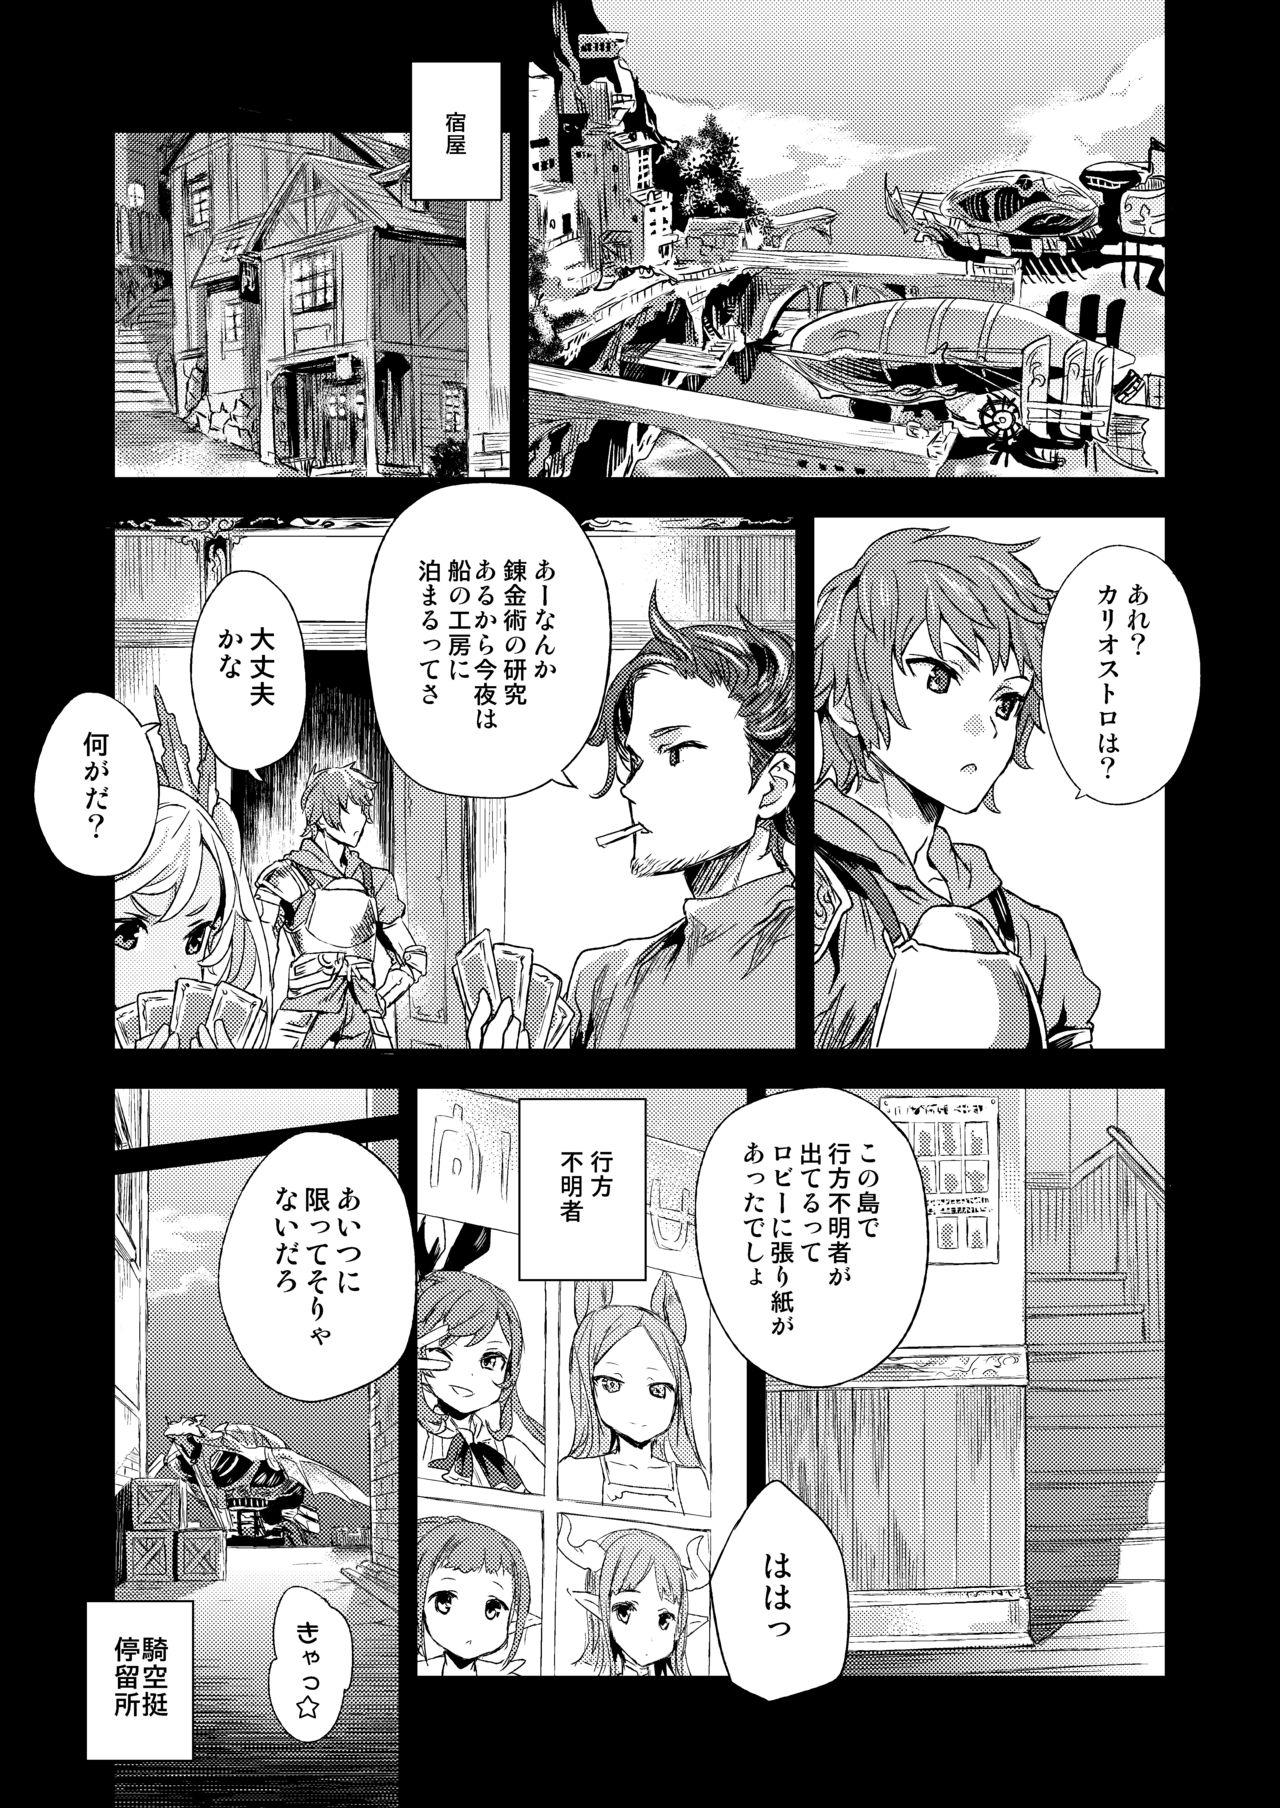 18 Year Old BOTTOM of the SKY - Granblue fantasy Lezdom - Page 12